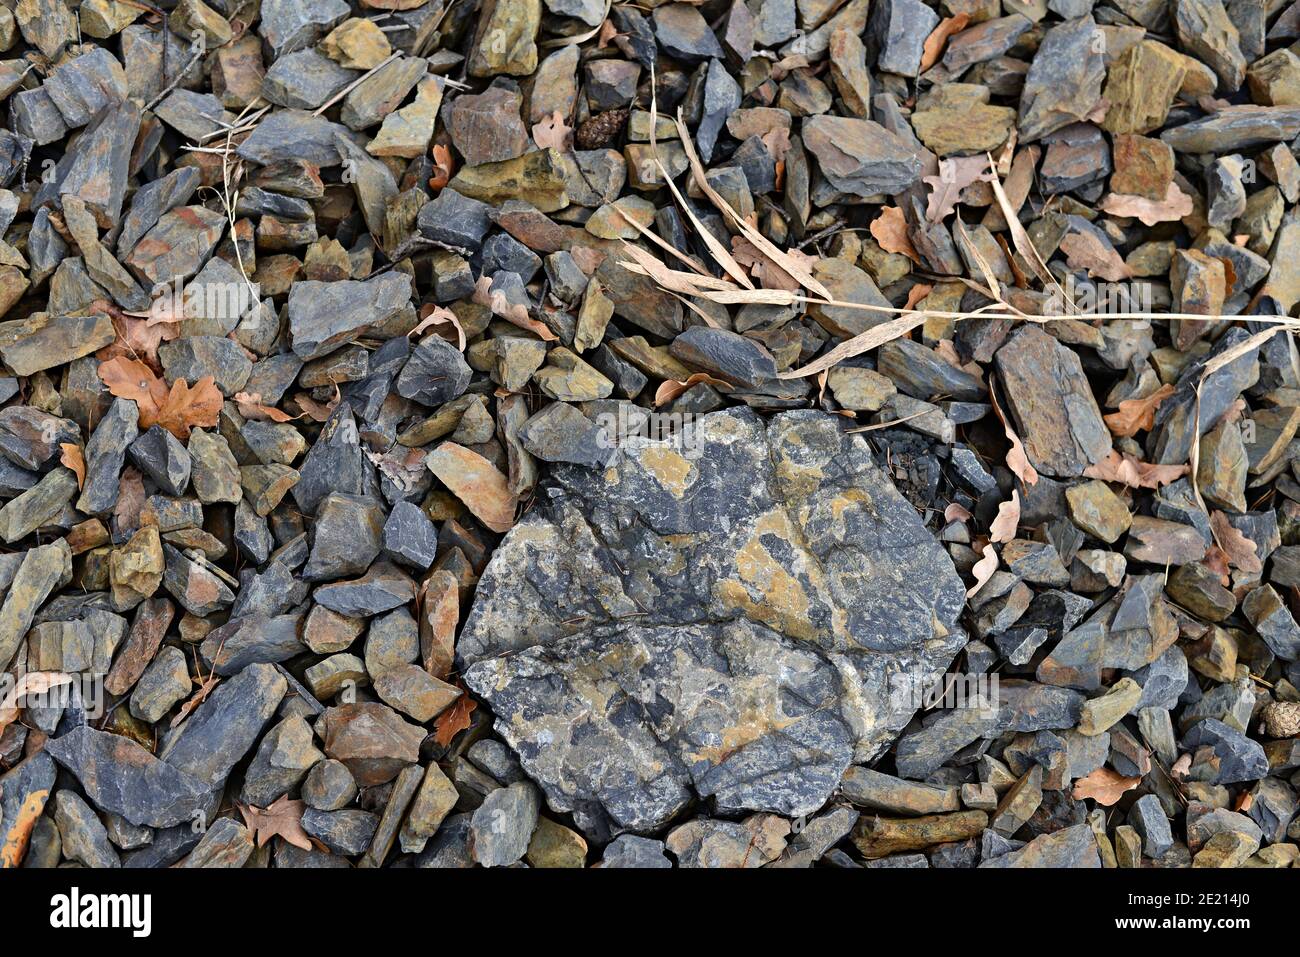 A large stone surrounded by smaller stones, withered grass and brown oak leaves. Winter beach of gravel and stones. Withered reeds on the stones. Wint Stock Photo